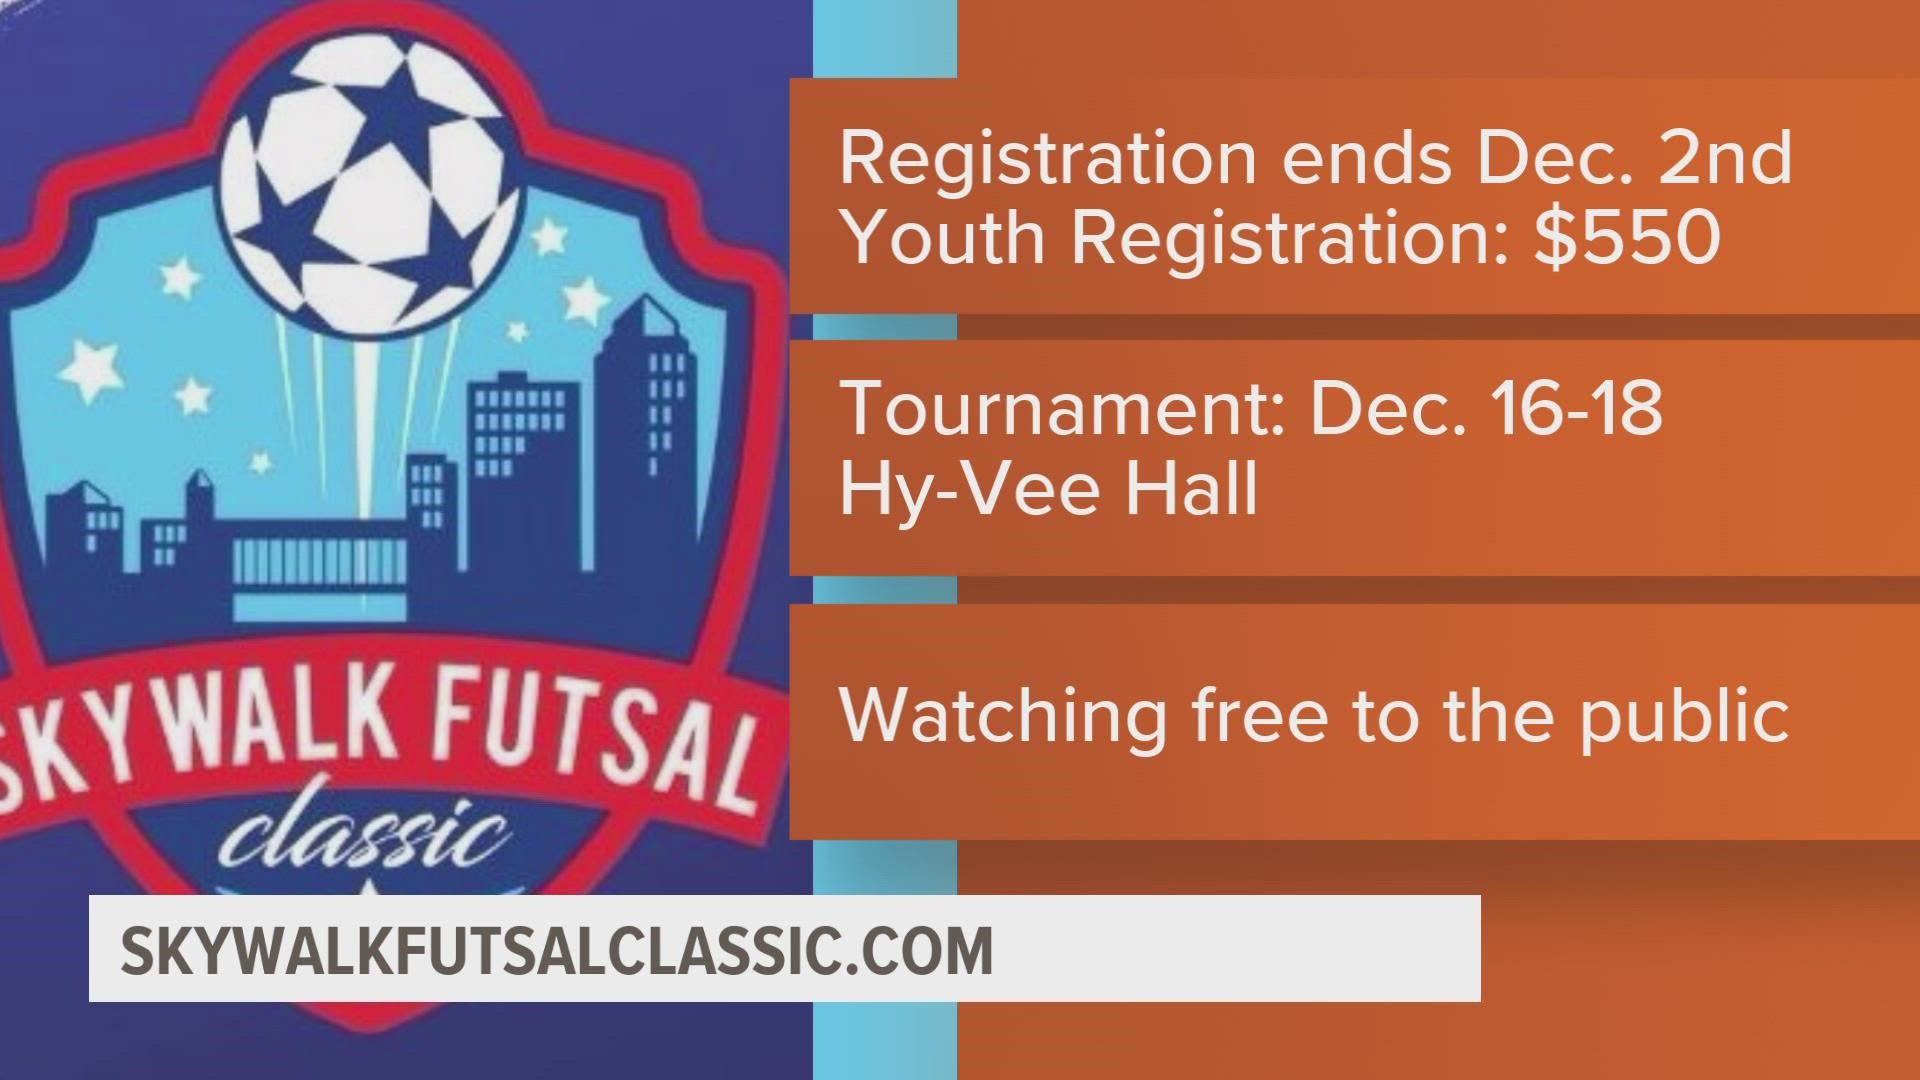 The 5th annual Skywalk Futsal Classic is Dec. 16 through 18 at Hy-Vee Hall in downtown Des Moines.